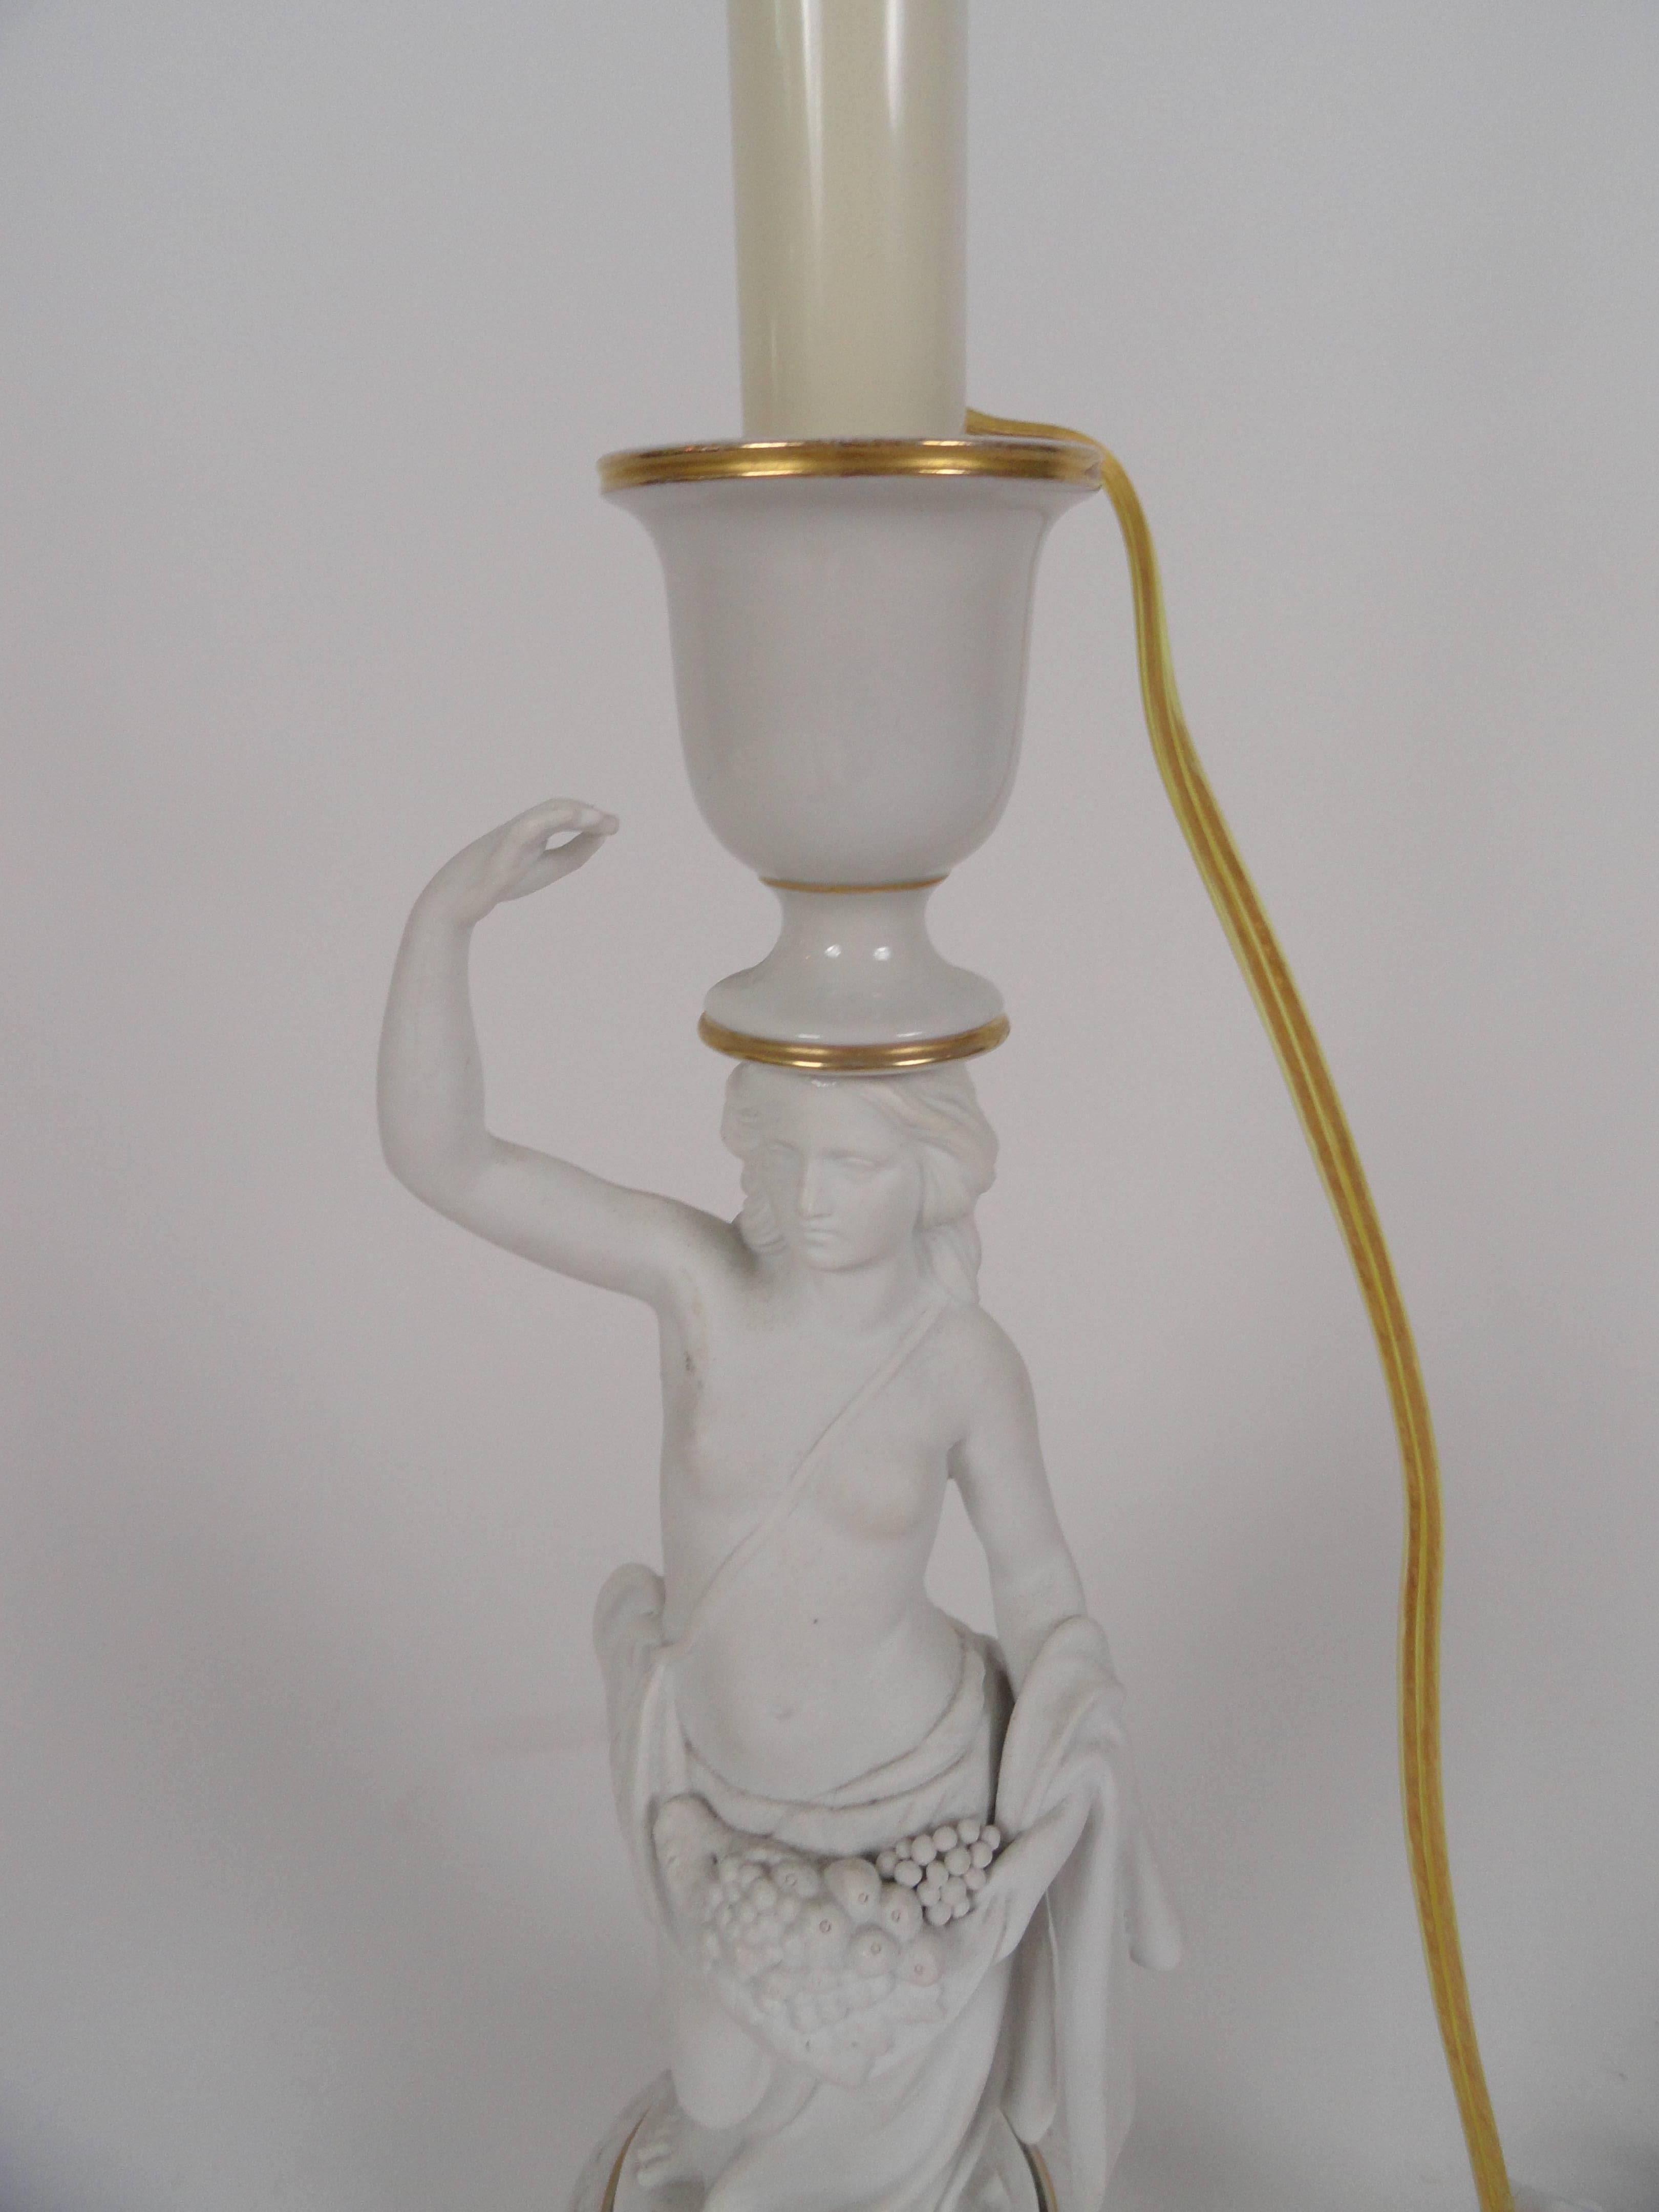 European Female Figure Bisque Lamp In Good Condition For Sale In West Palm Beach, FL